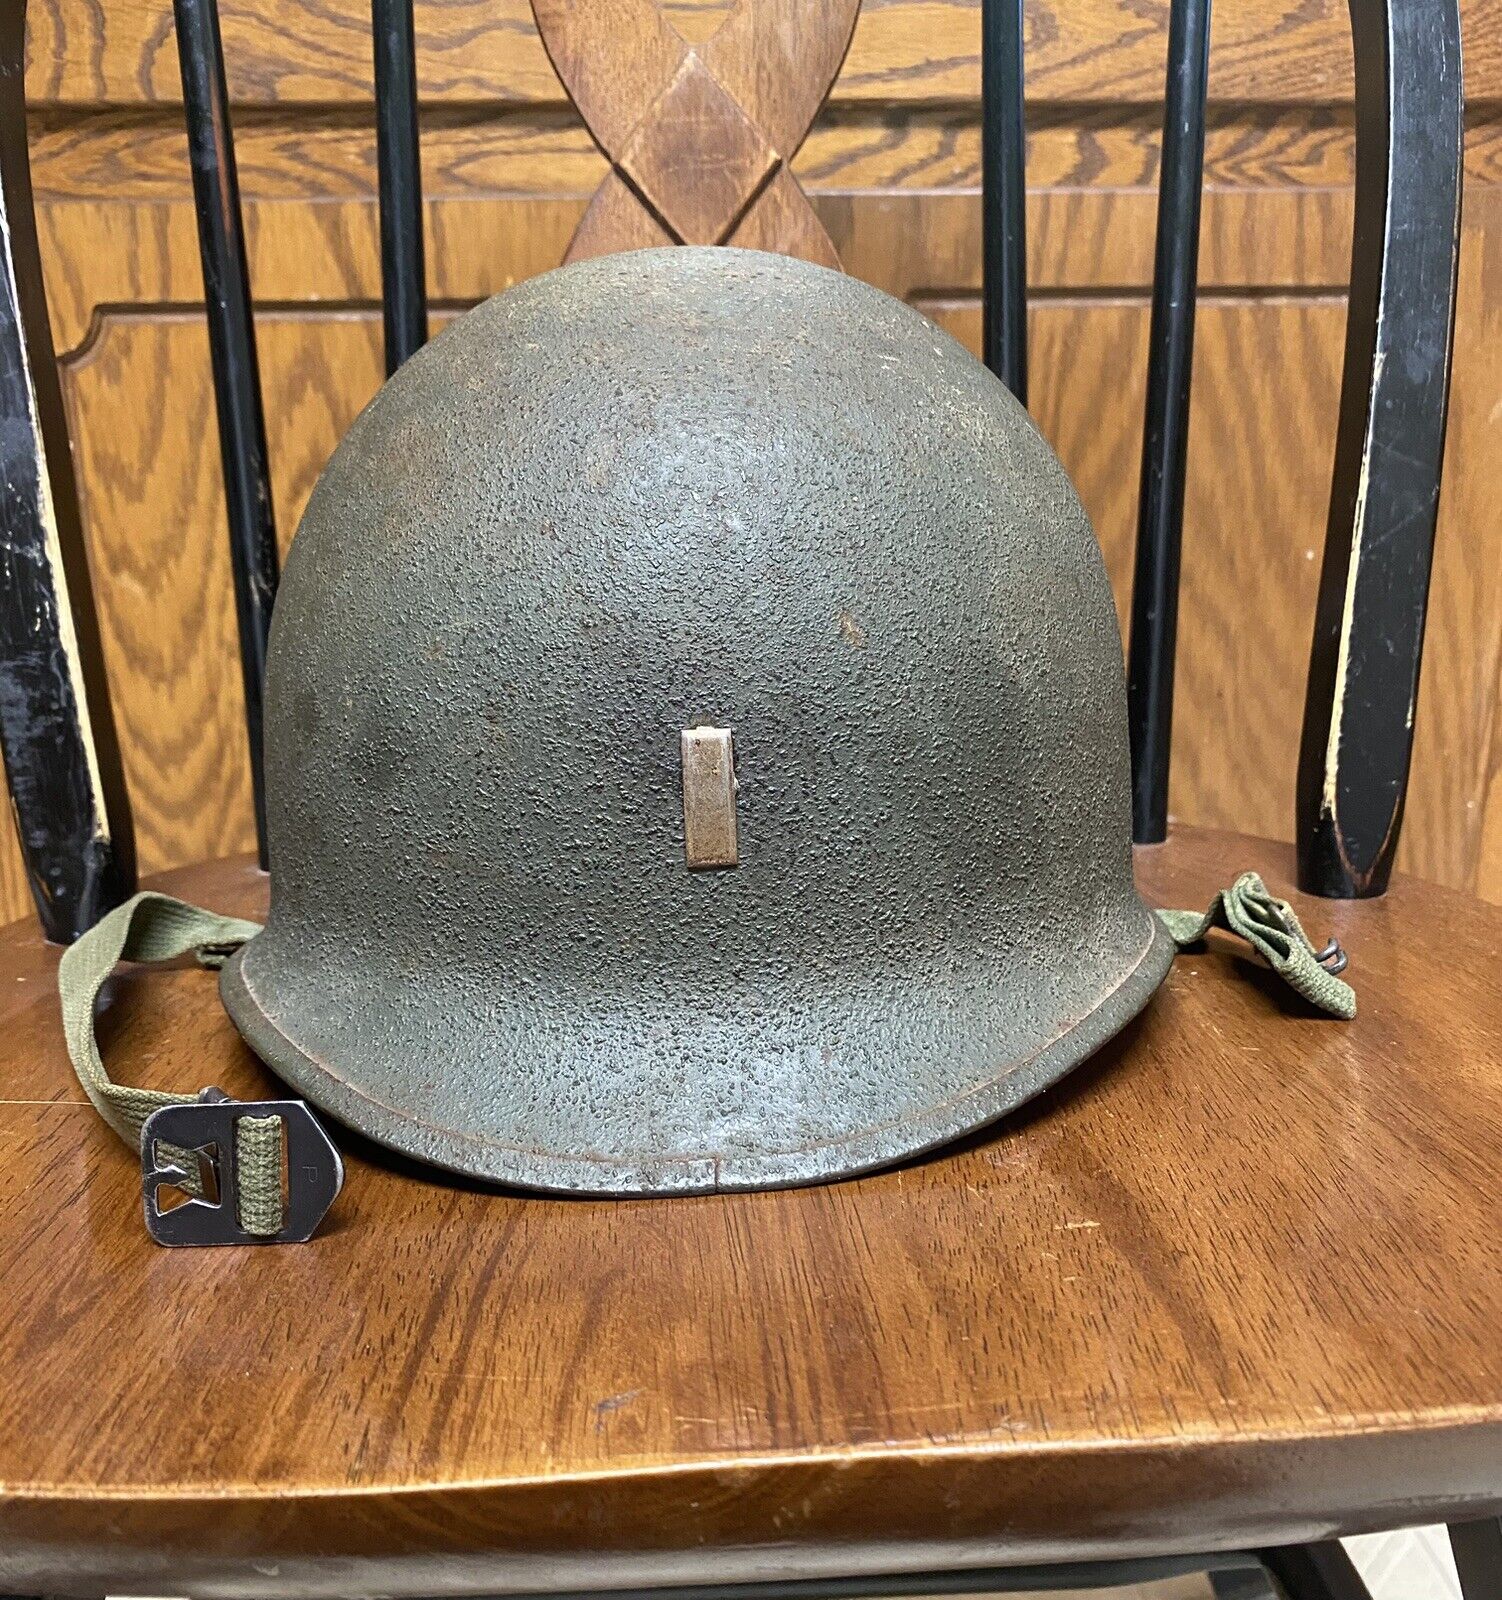 WW2 US Swivel Bale Lieutenant McCord Helmet Possibly 407th Infantry Division